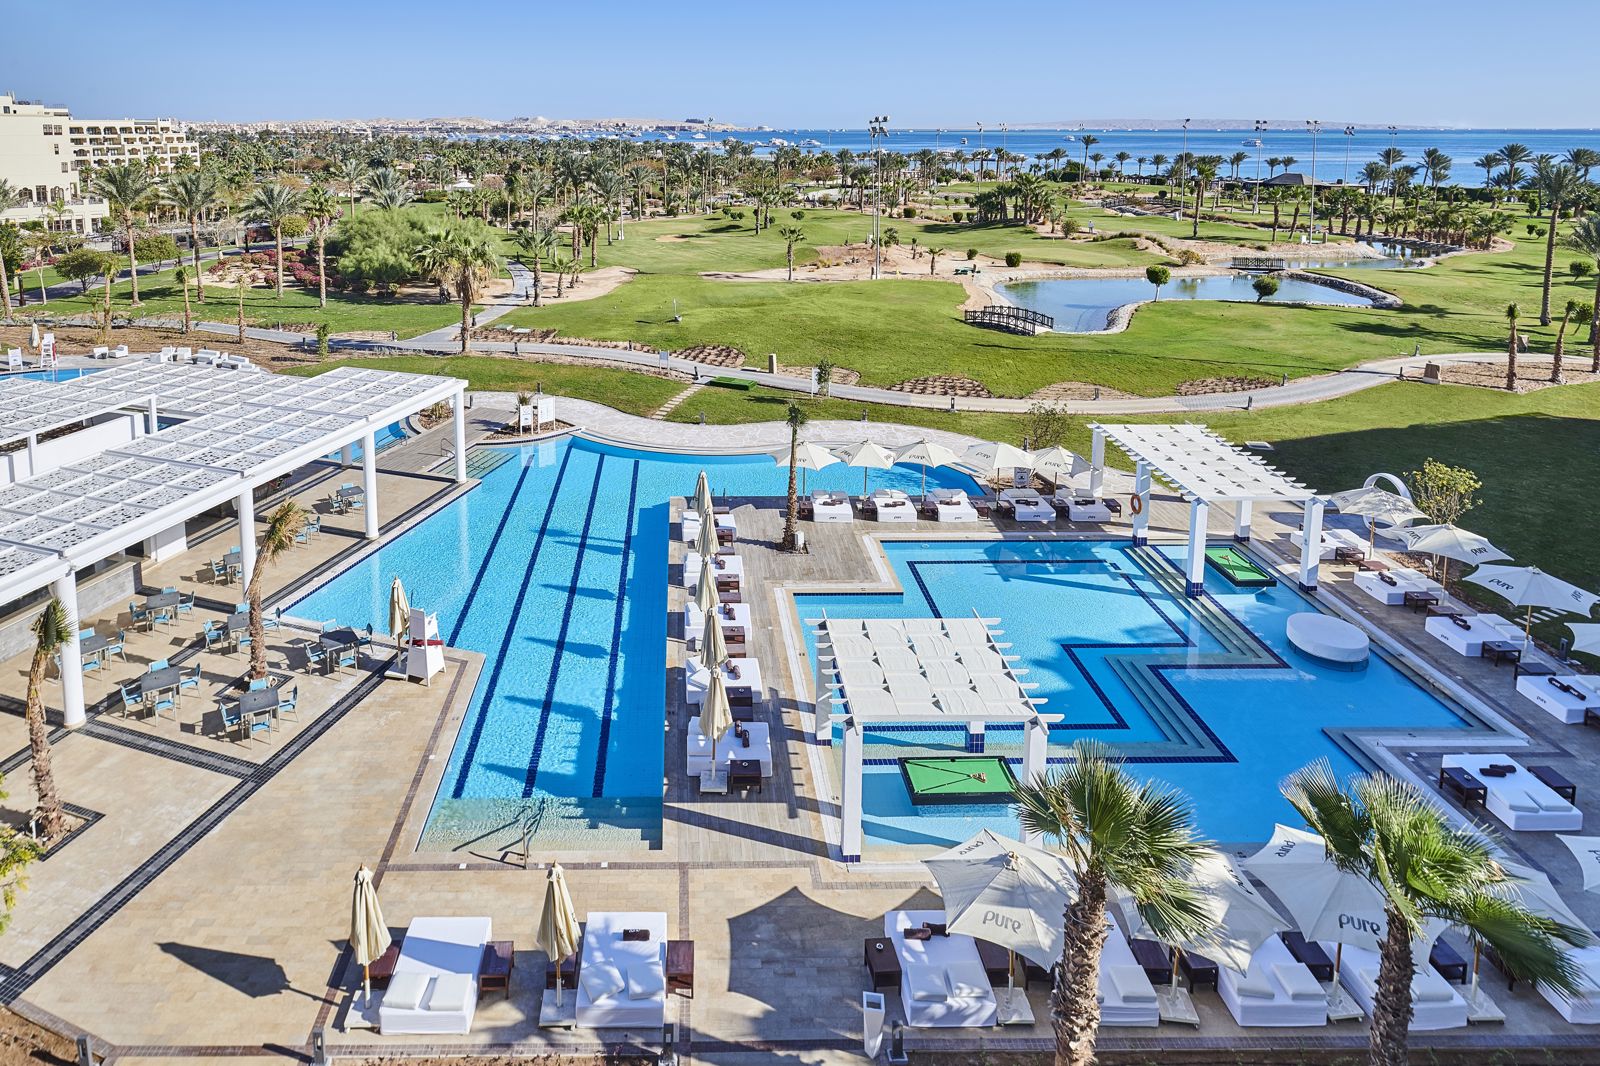 Steigenberger Pure Life Style - Egypte - Rode Zee - Hurghada-Stad